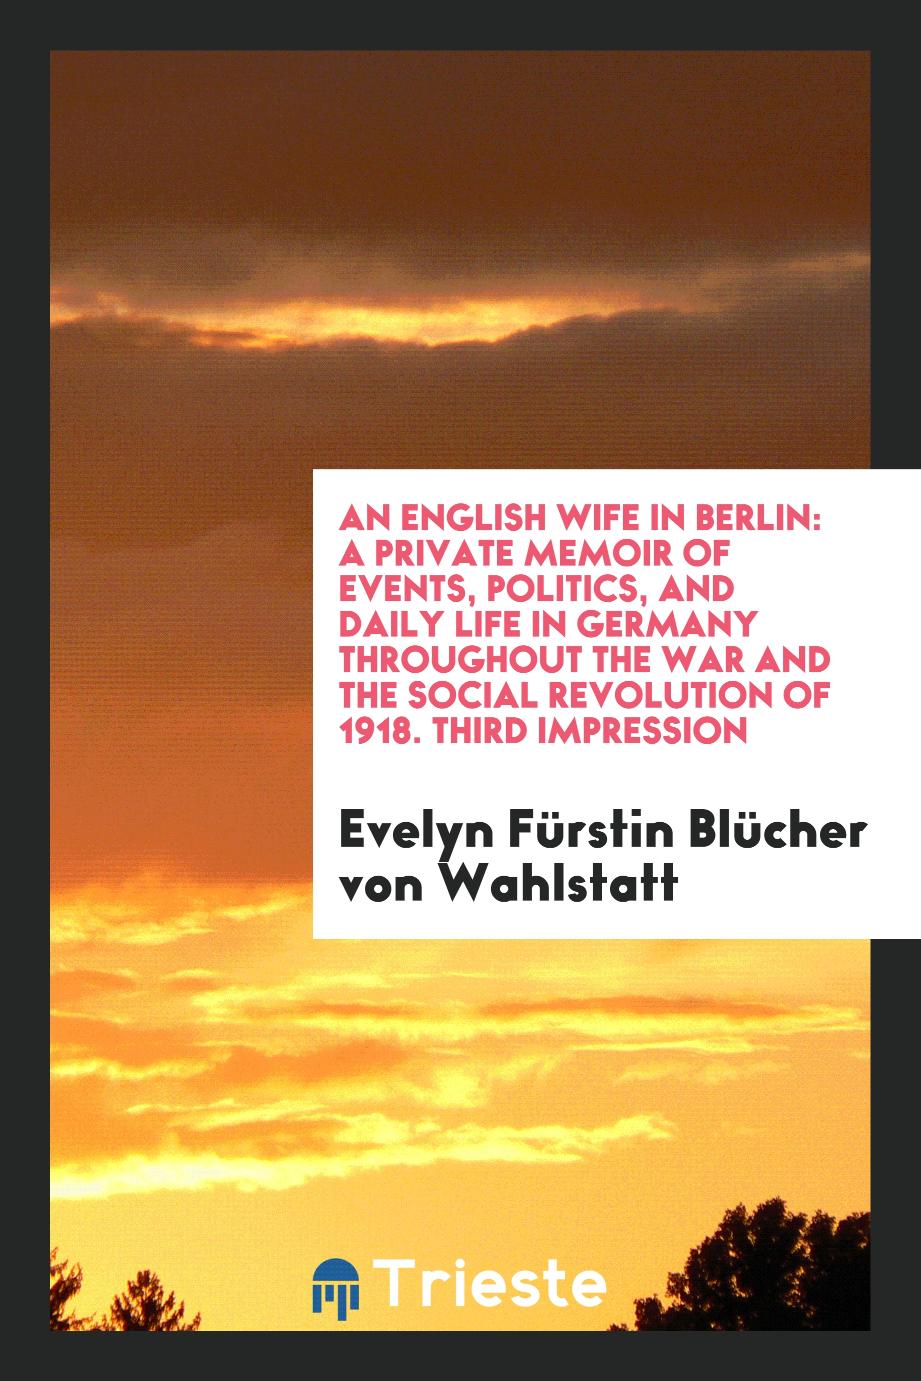 An English Wife in Berlin: A Private Memoir of Events, Politics, and Daily Life in Germany Throughout the War and the Social Revolution of 1918. Third Impression